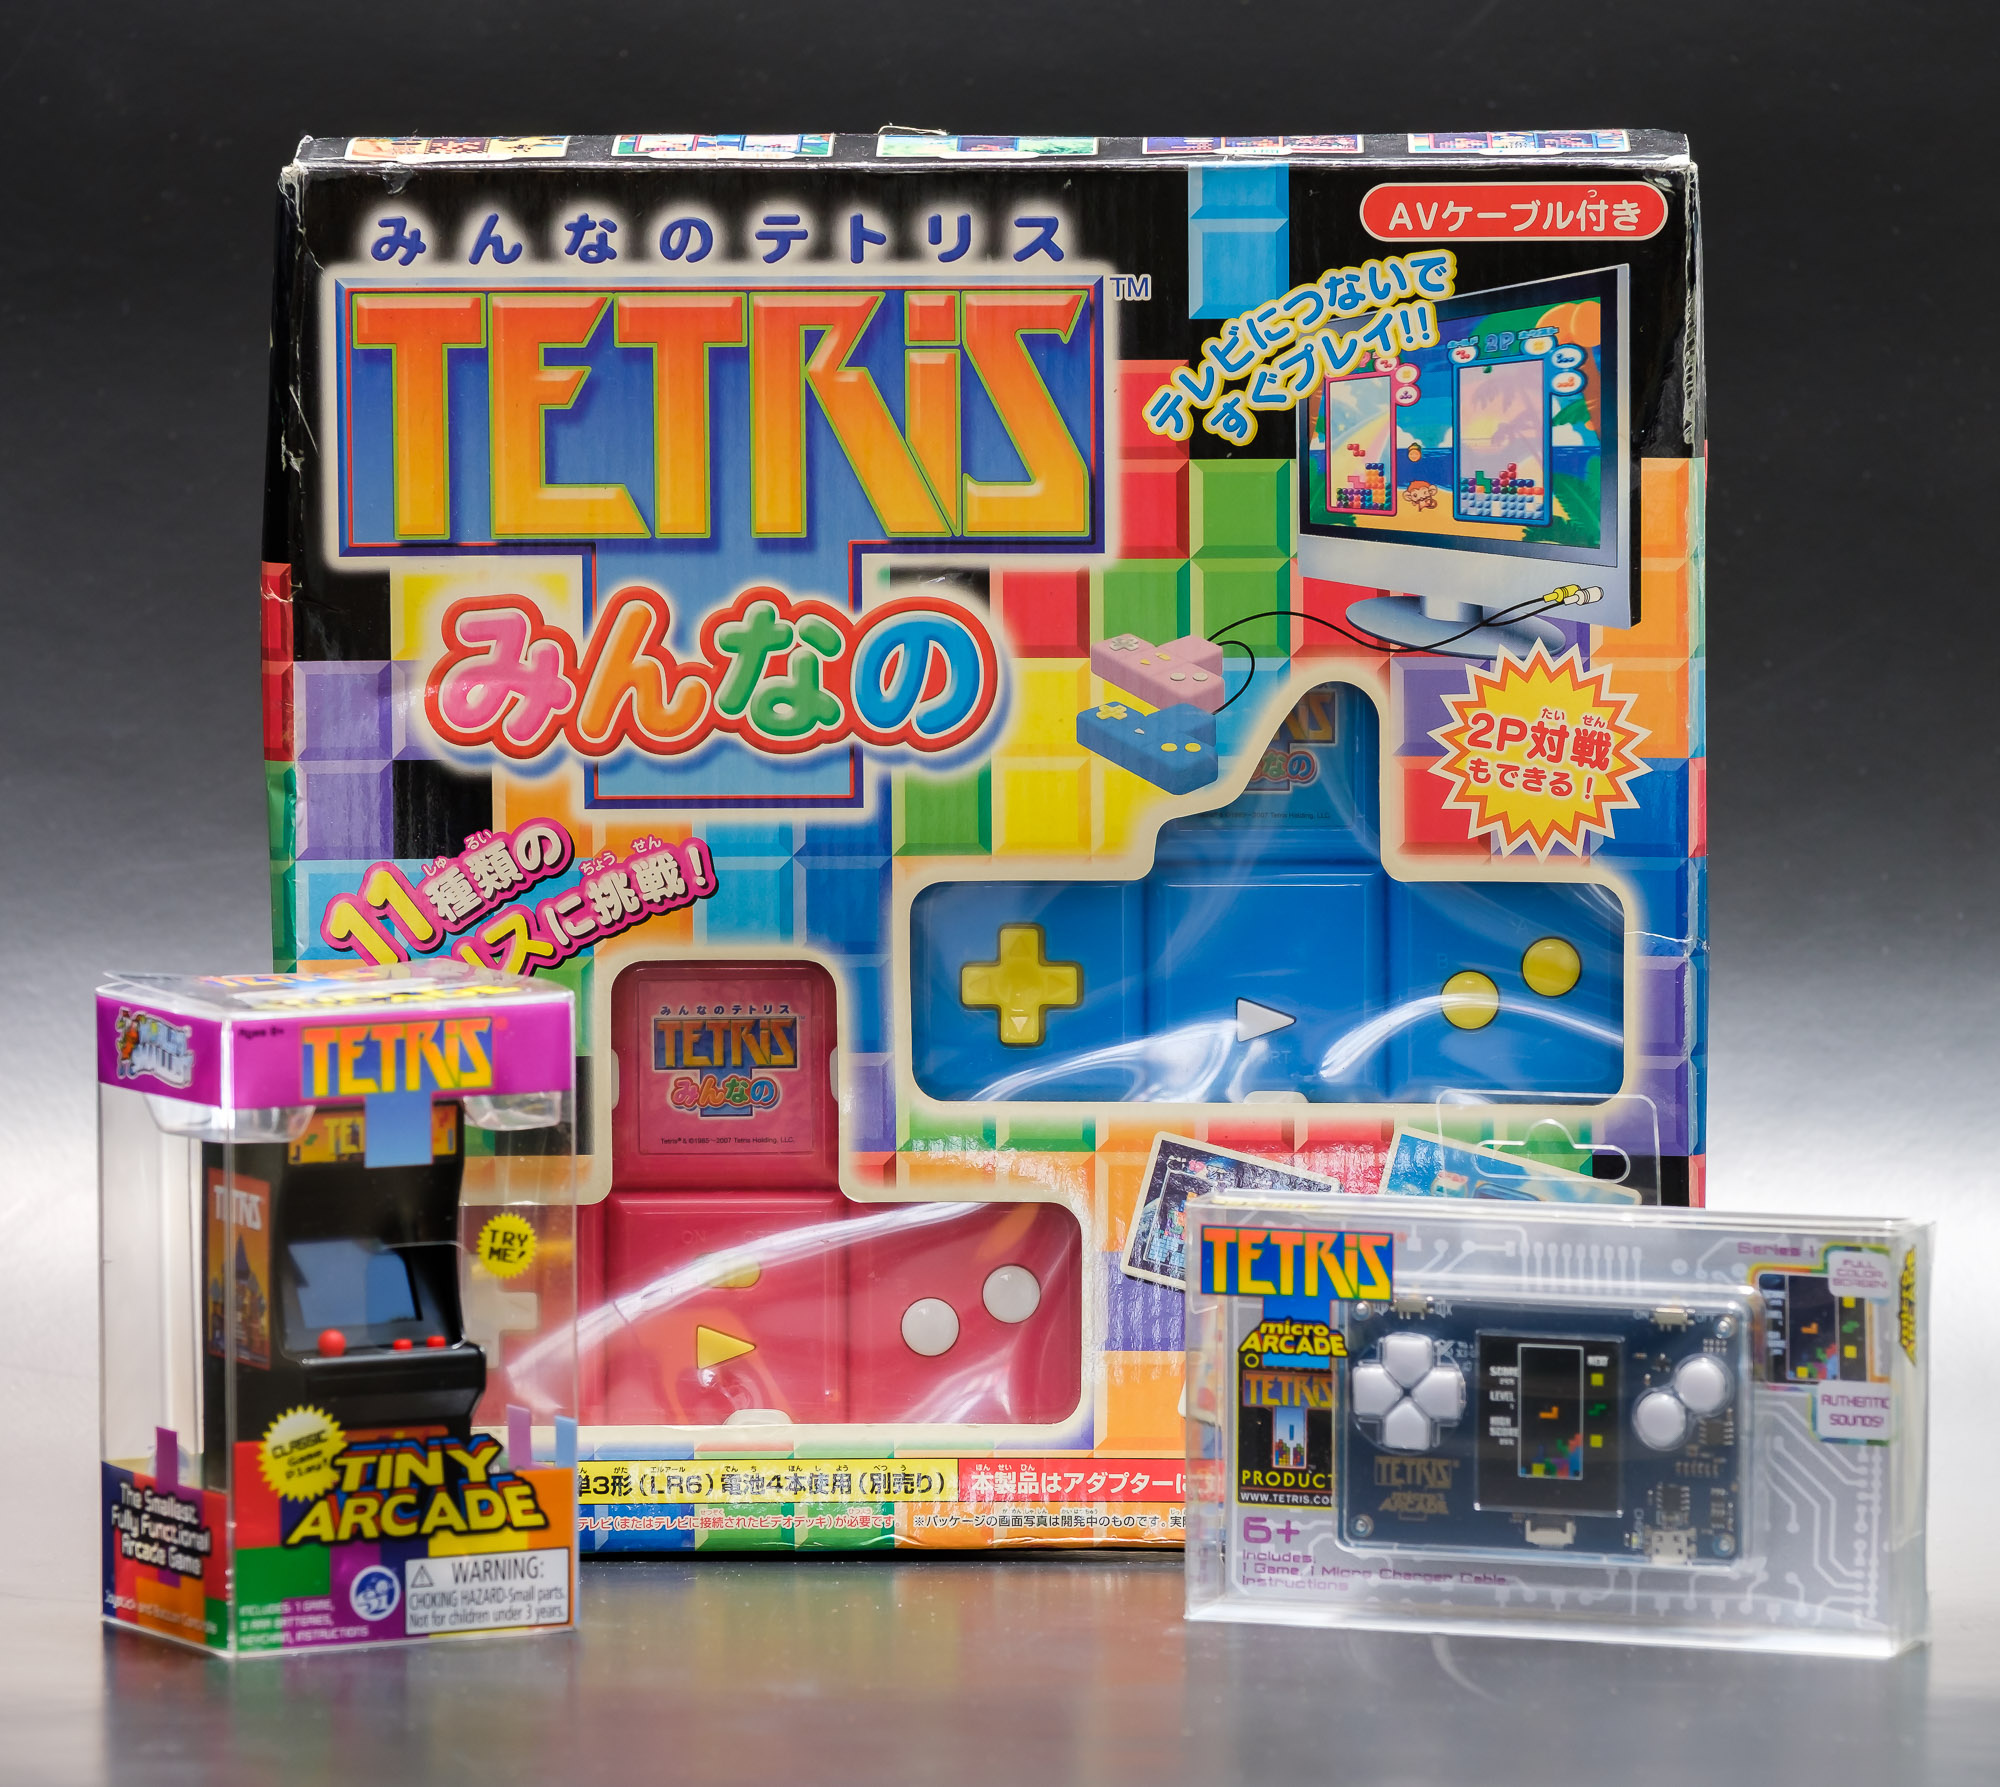 A photo showing three boxed games neatly arranged against a black backdrop. The first game is Tiny Arcade Tetris, second is Minna no Tetris, and the third is Micro Arcade Tetris.